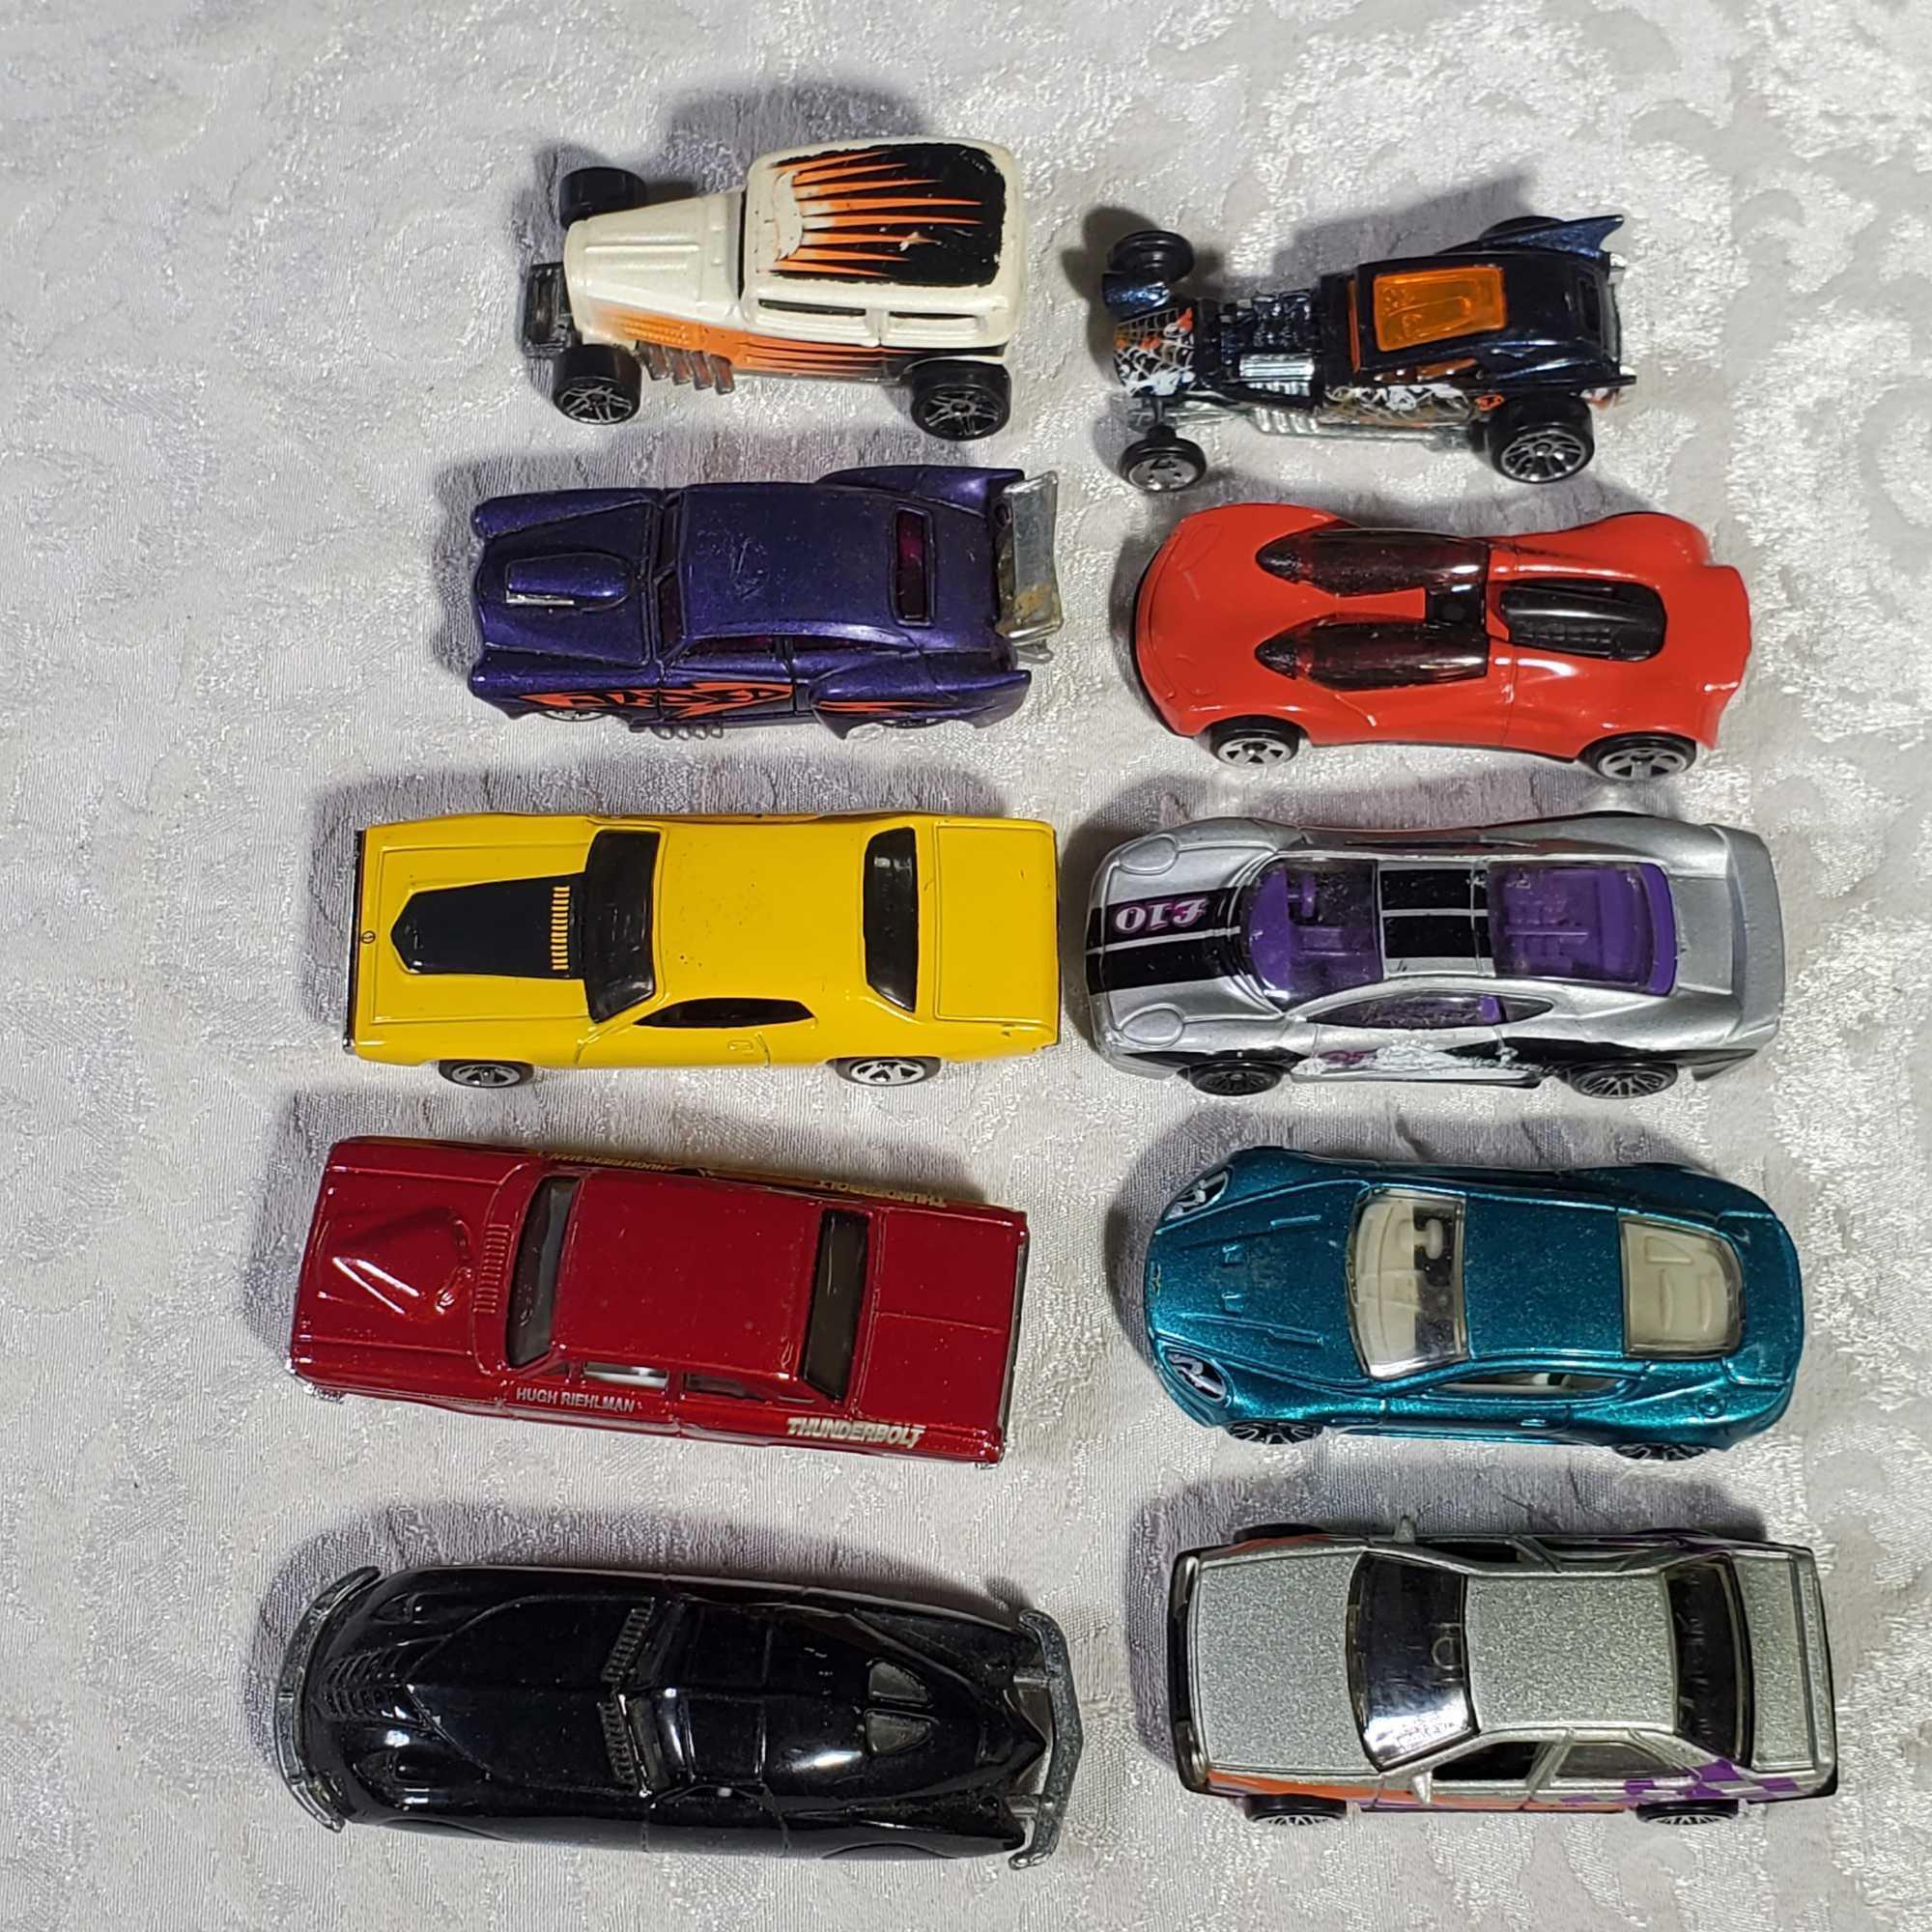 Lot of Die-cast Cars - 2 -1:24 and 50+ 1:64 Scale, Most in Original Packaging